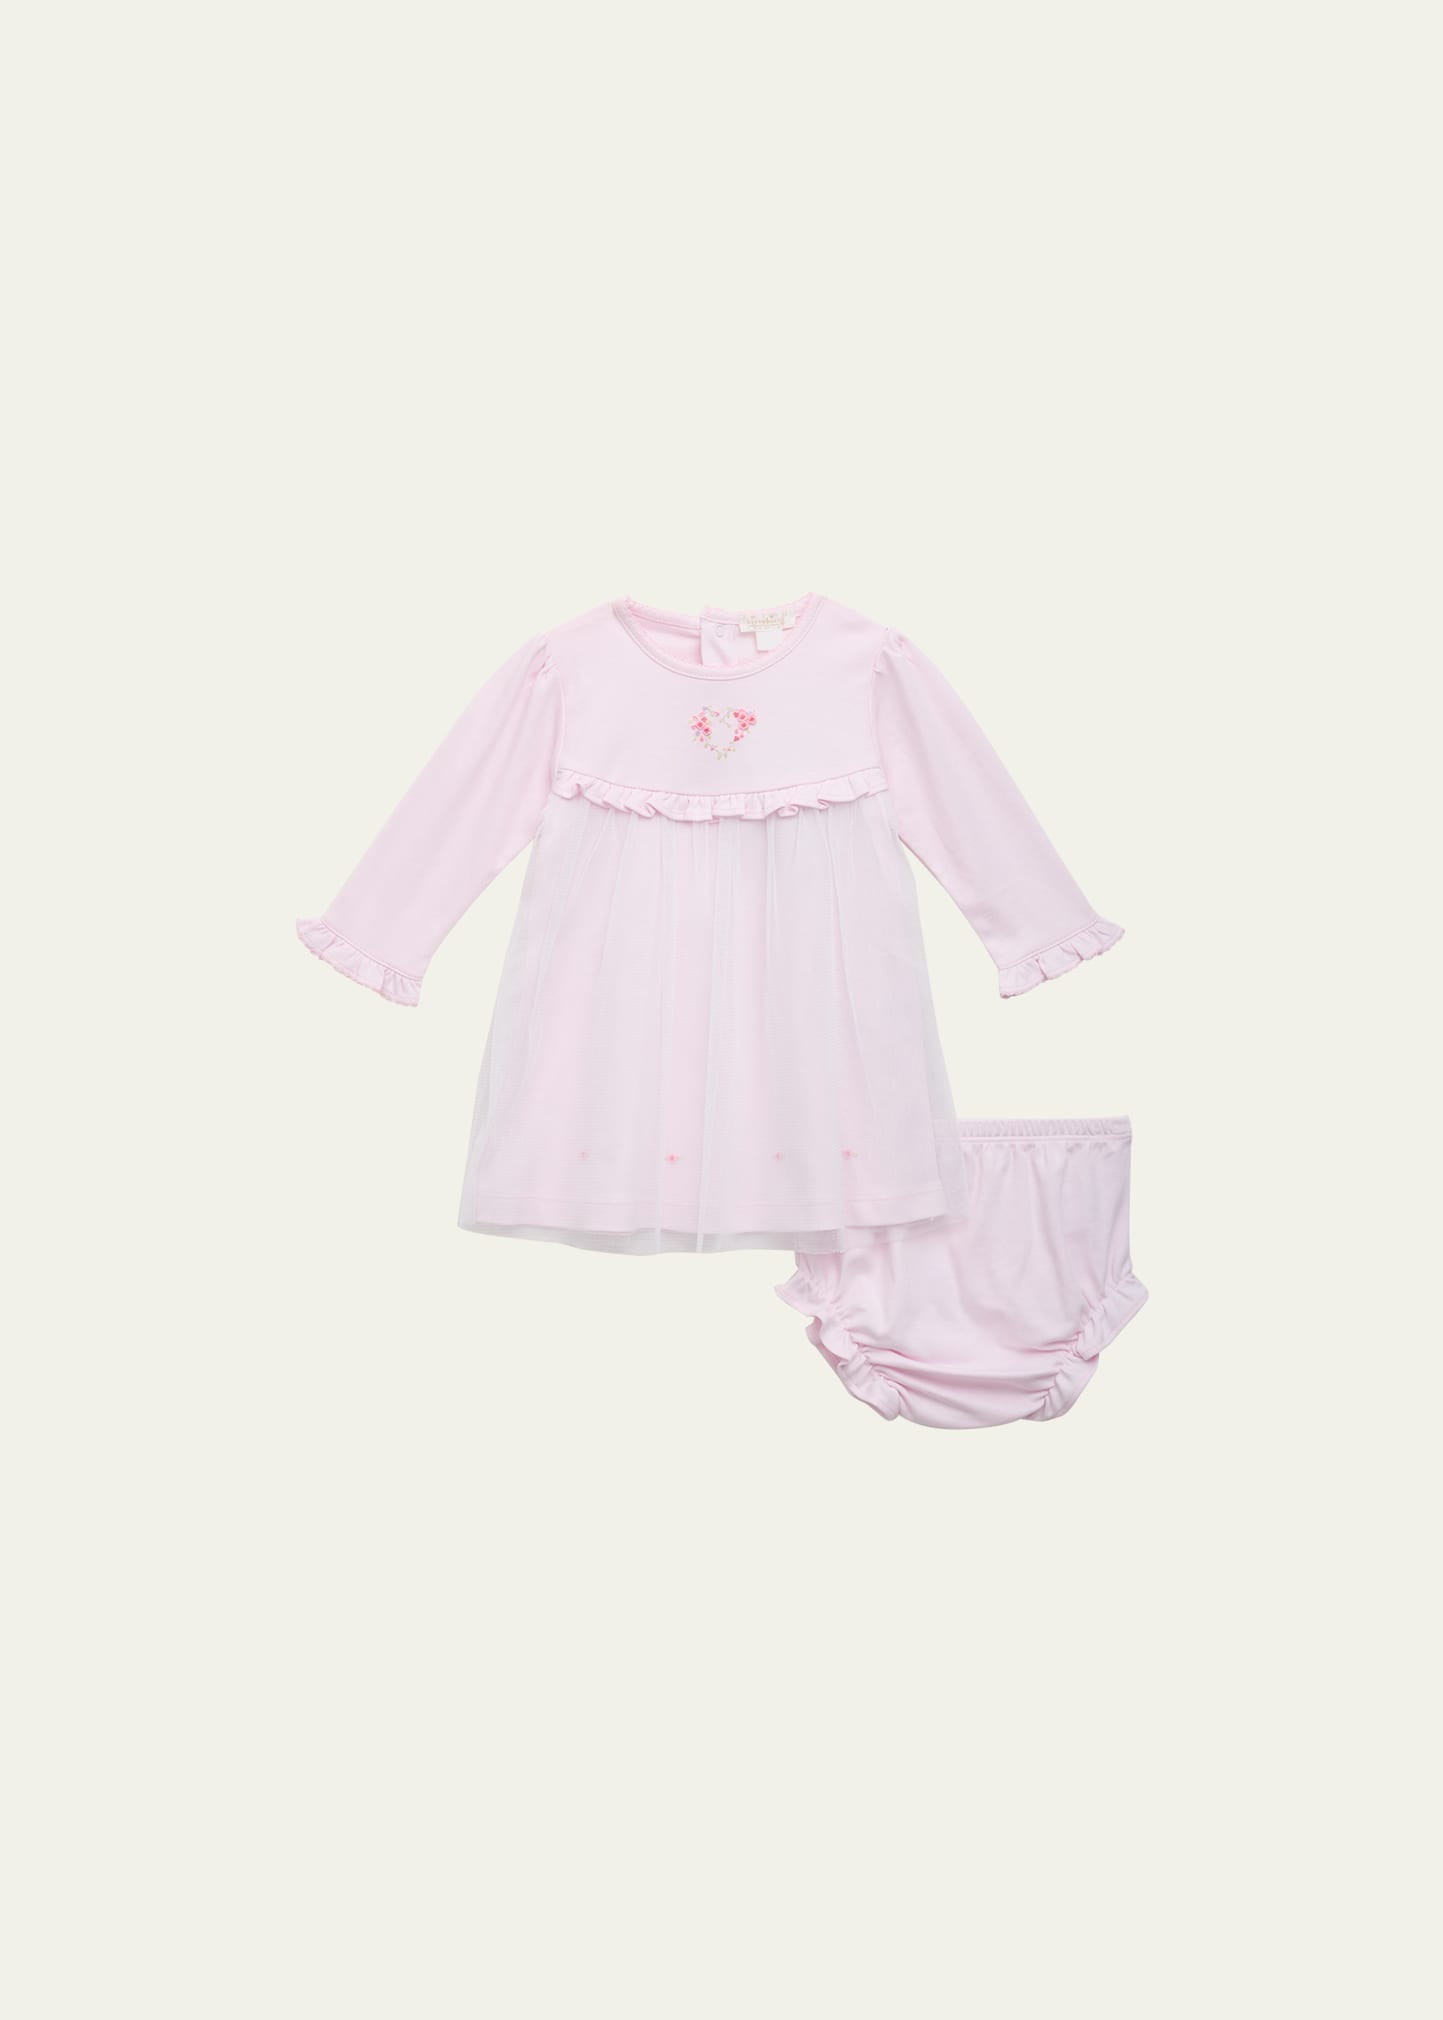 Girl's Hand Embroidered Dress W/ Bloomers, Size Newborn-9M